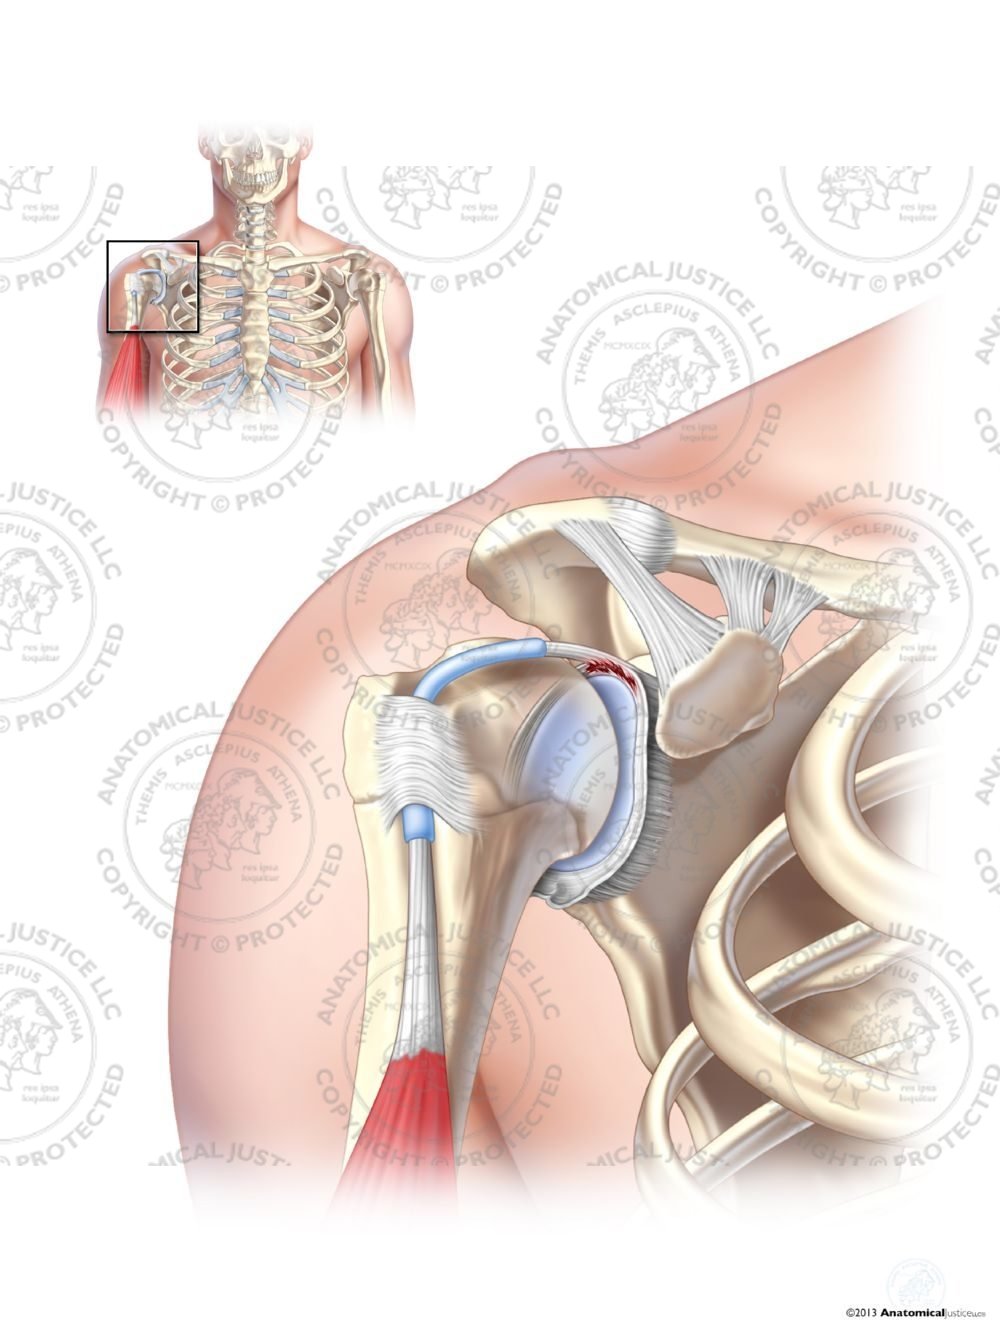 Type I SLAP Tear of the Right Labrum – No Text